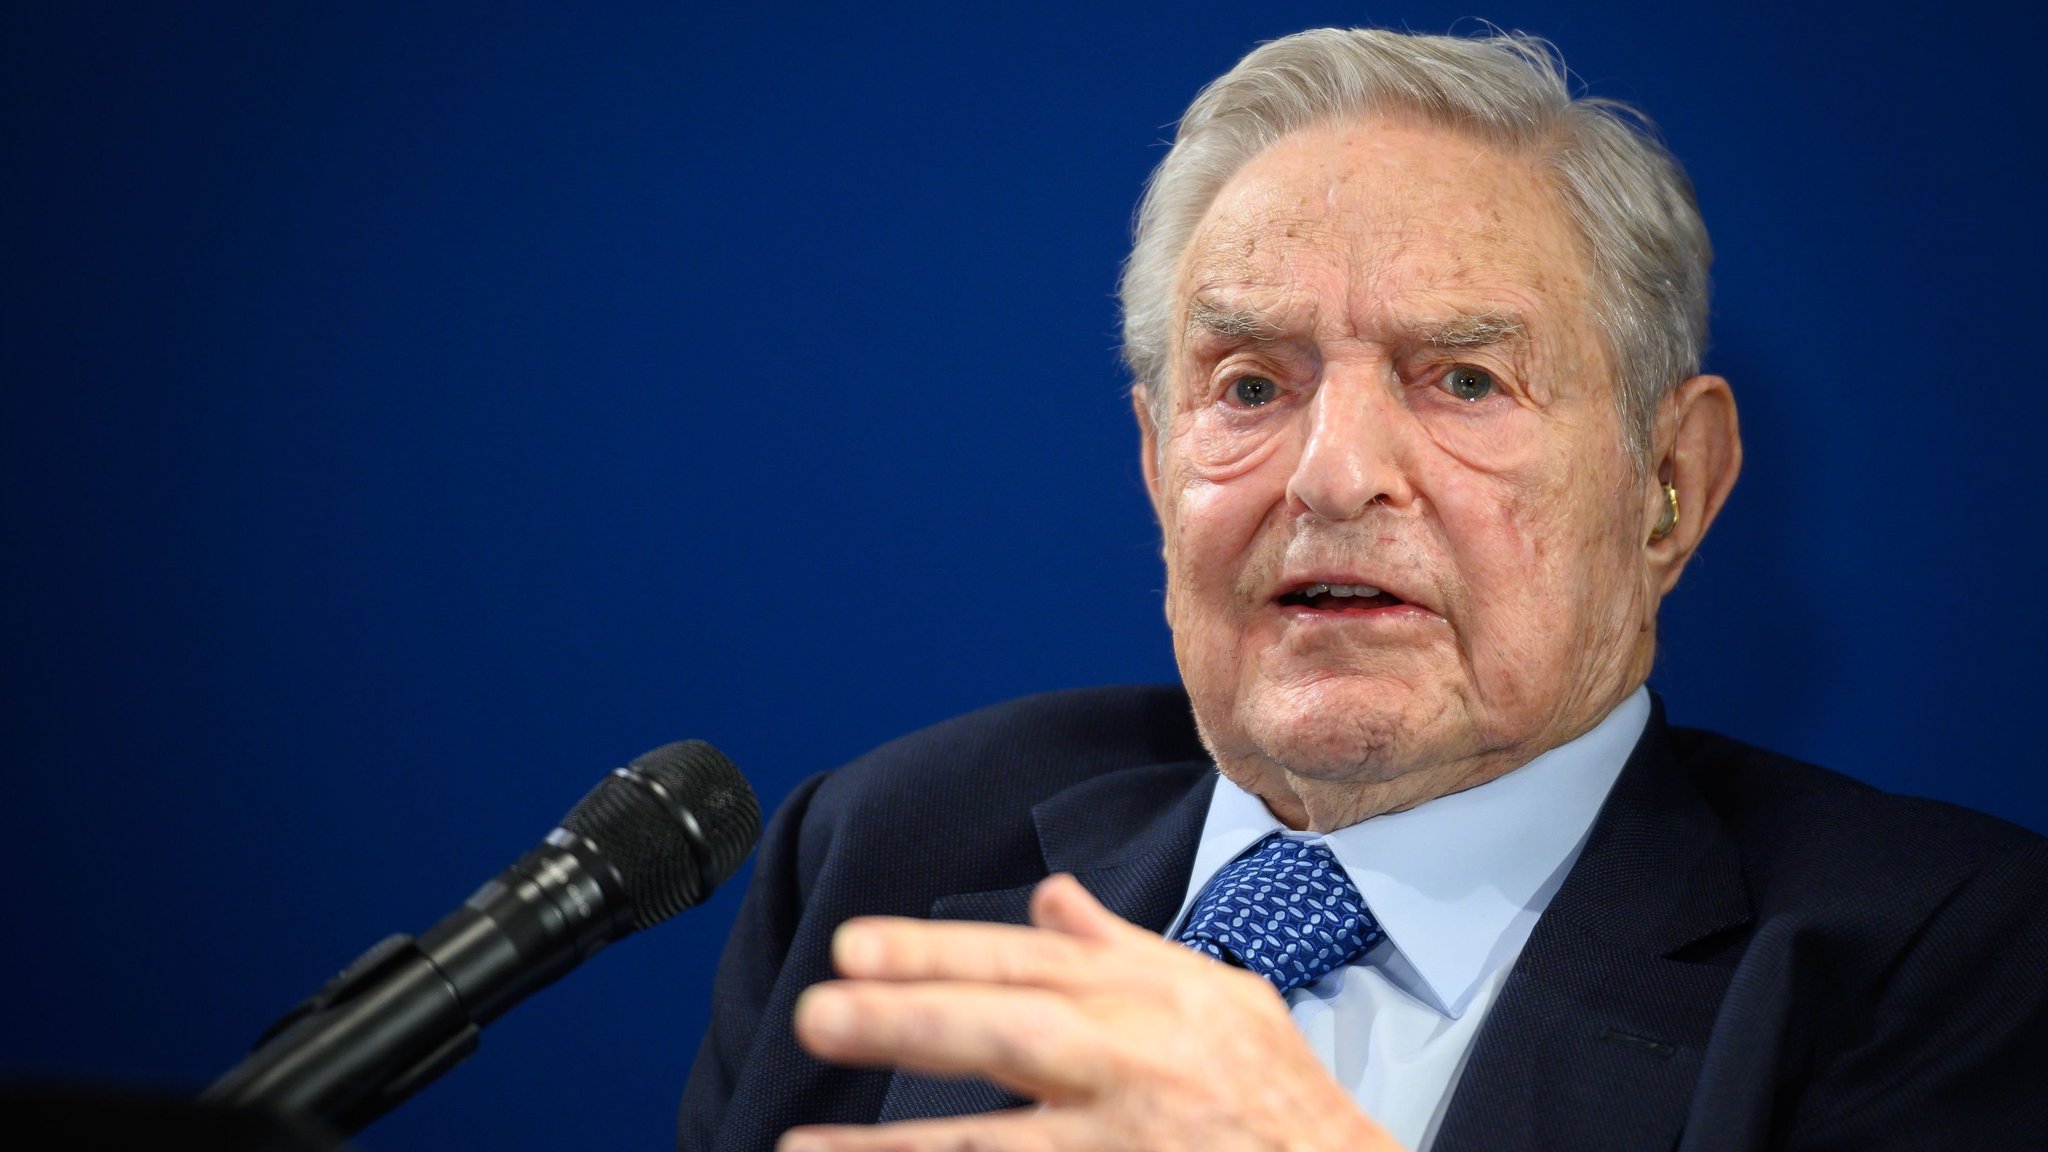 George Soros launches $1bn move to educate against nationalism